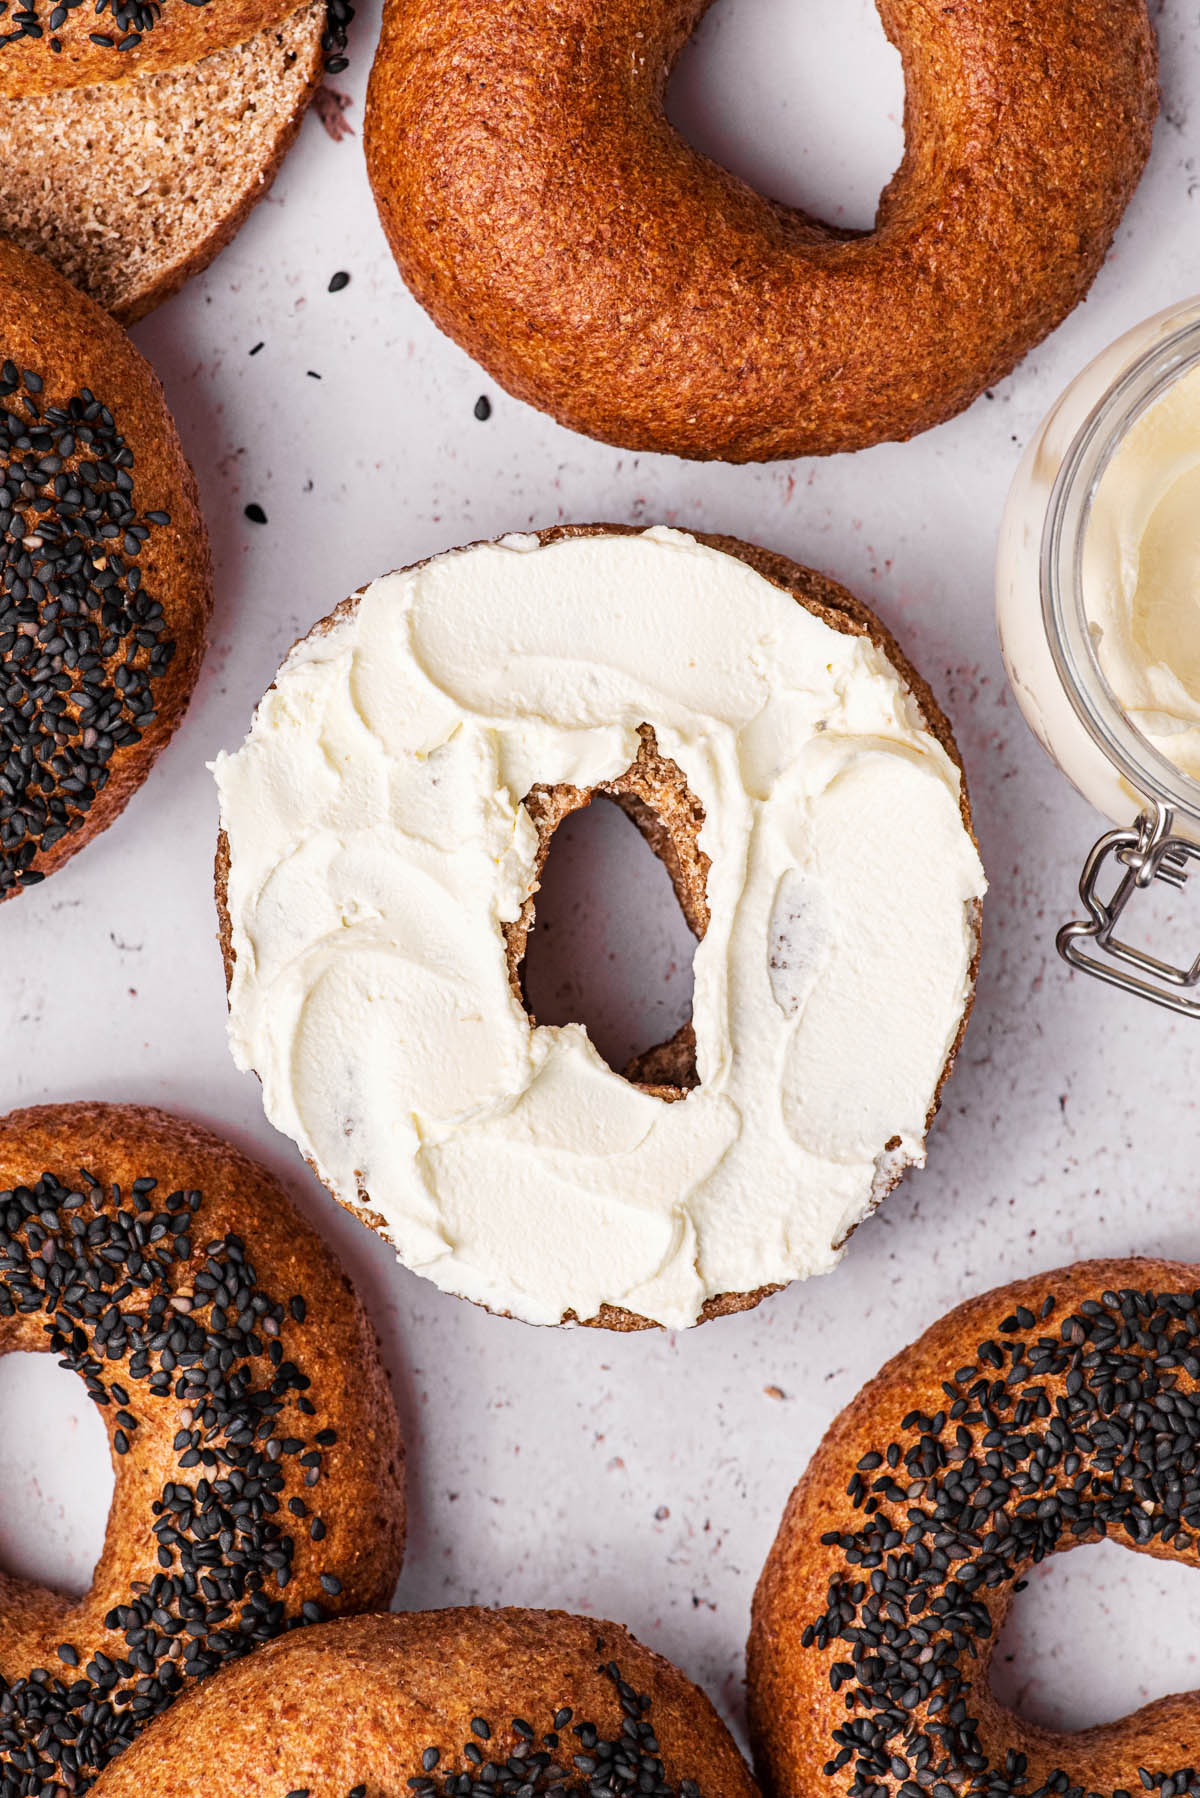 Several bagels, some topped with black sesame seeds, one half with cream cheese.